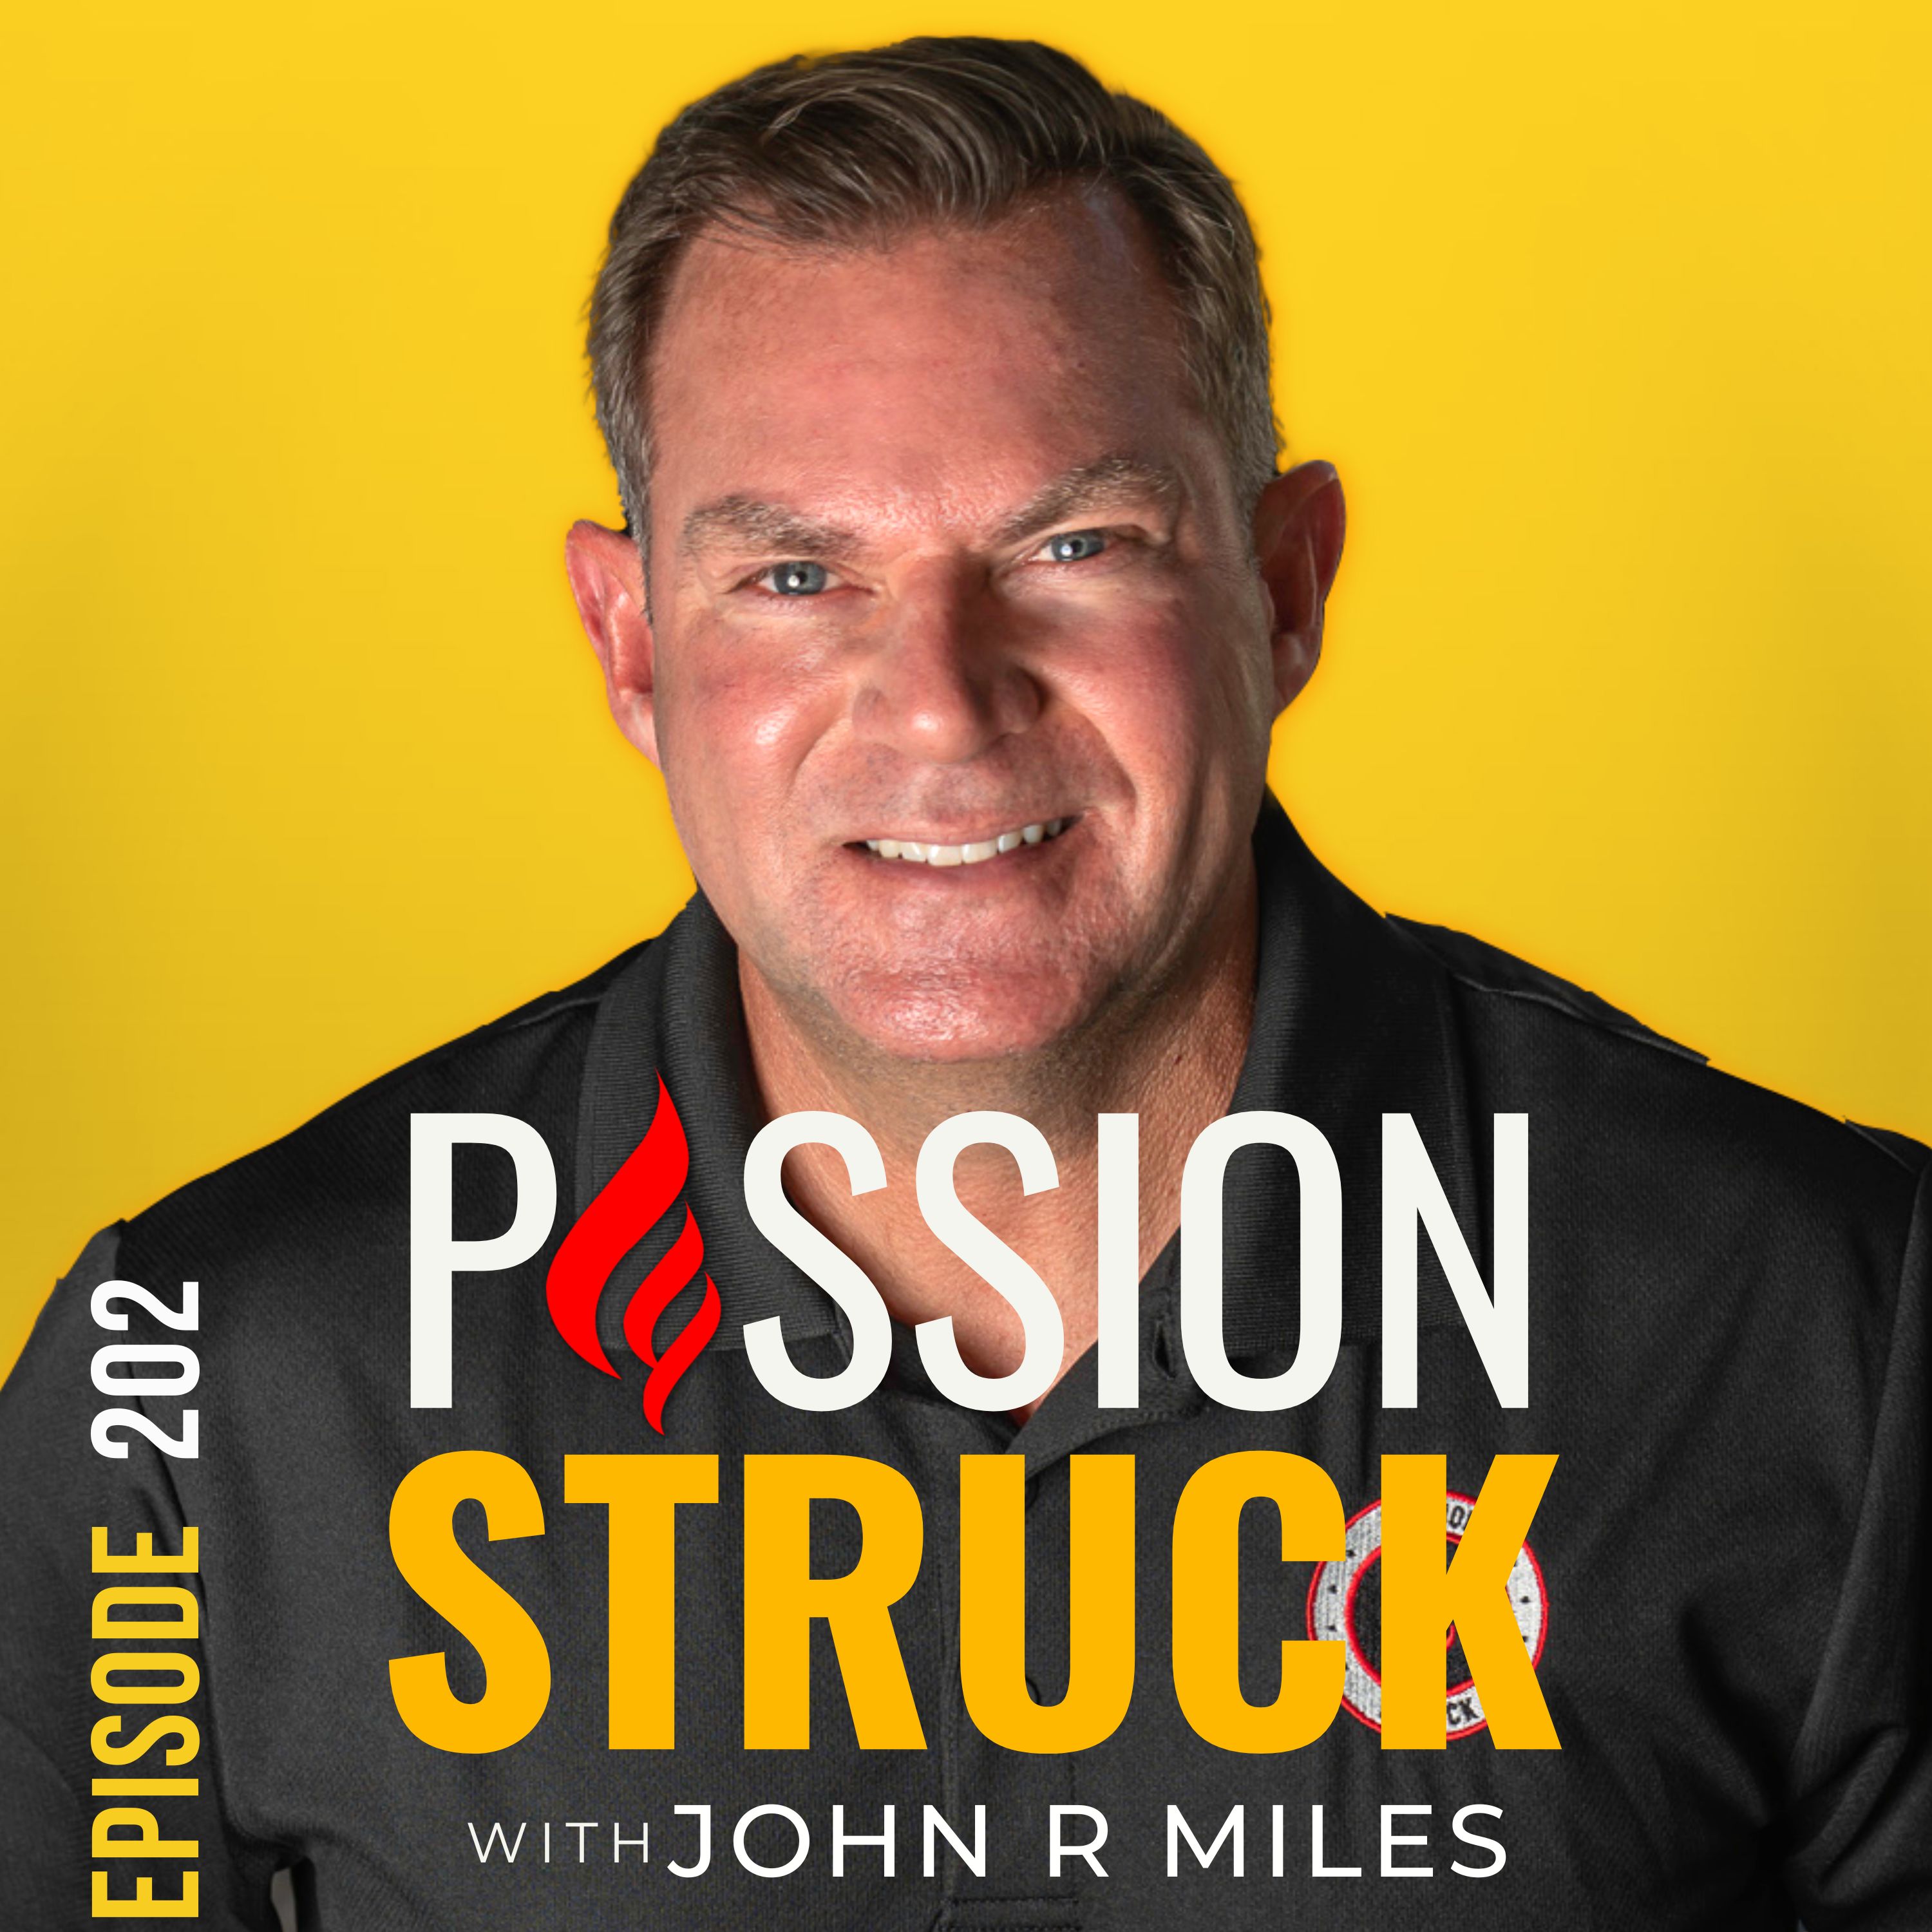 Passion Struck podcast album cover episode 202 with John R. Miles on how to be vulnerable